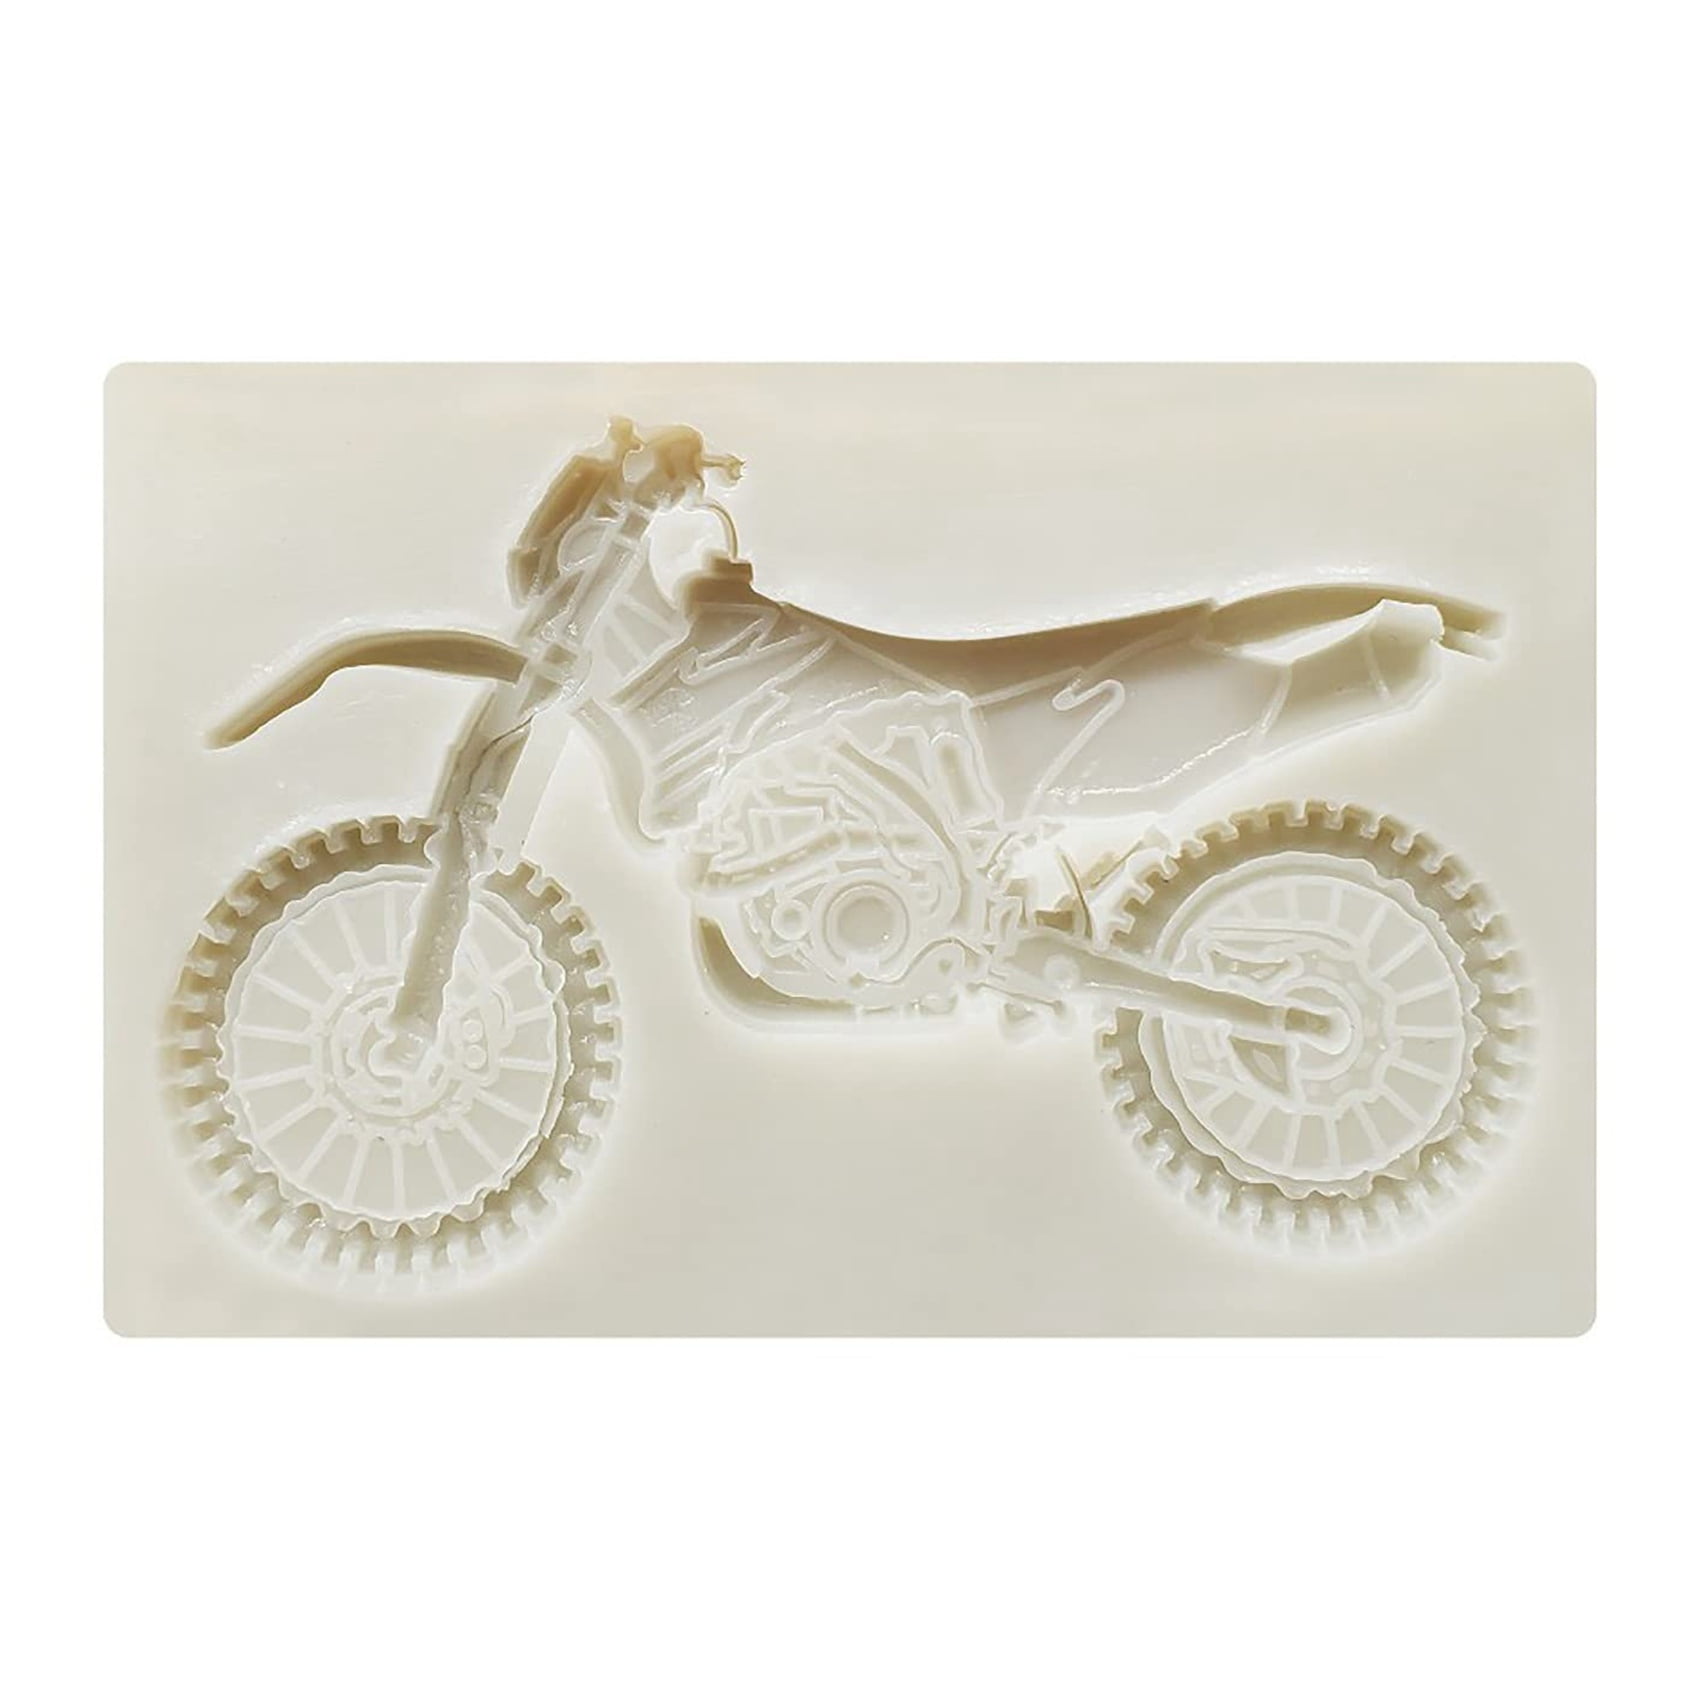 Silicone 3D Bicycle Bike Fondant Cake Chocolate Mold Mould Modelling Decorating 